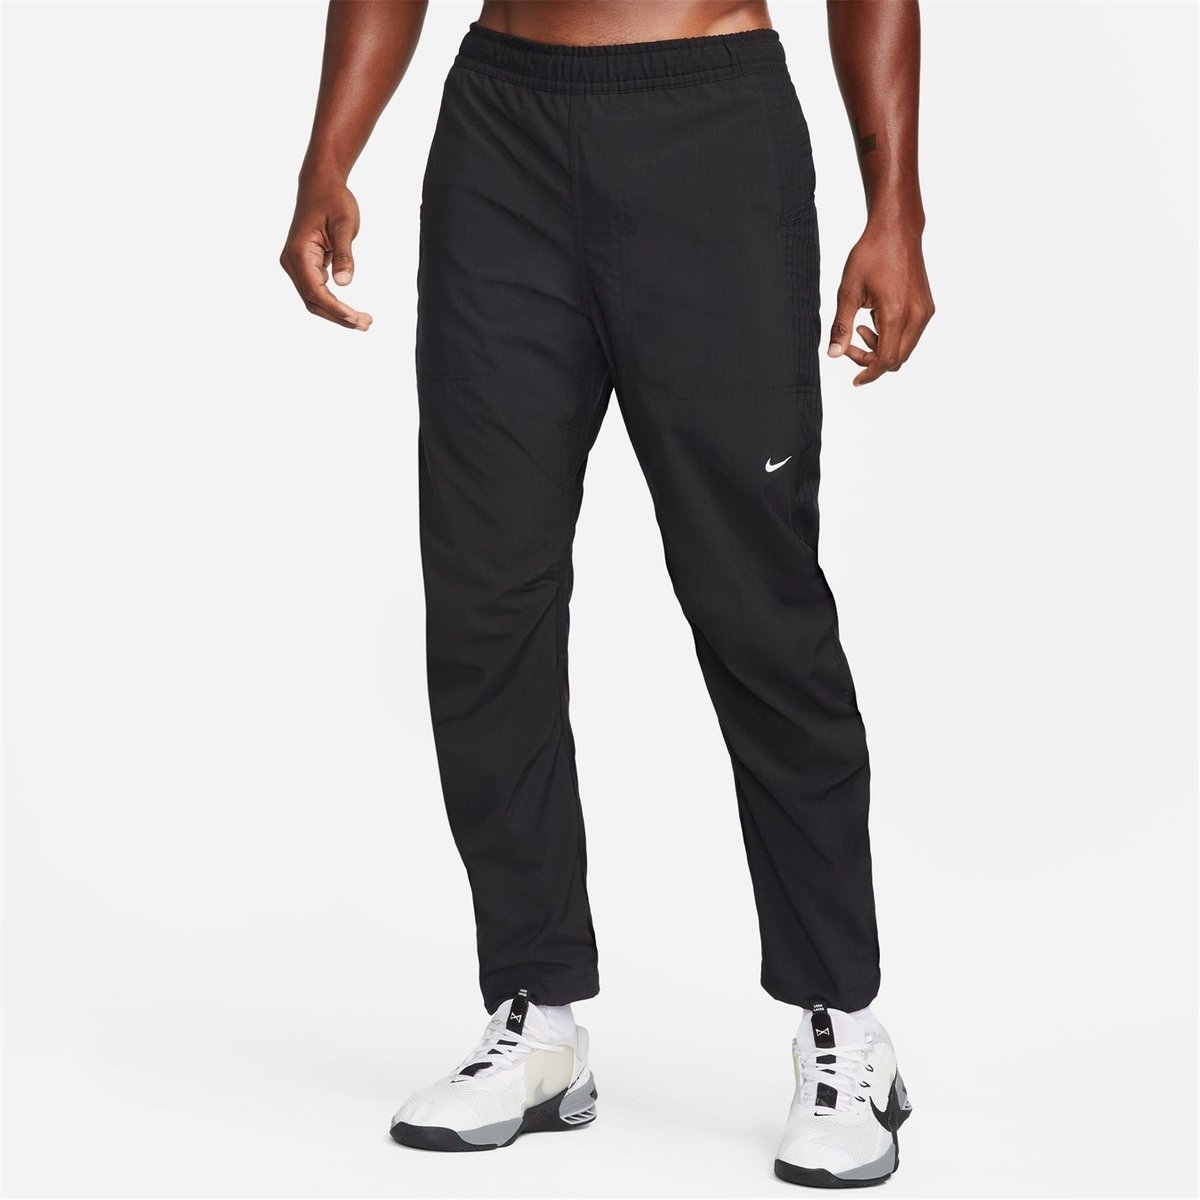 Buy Running Trousers, Elastic Fabric Polyester Zipper Design Summer Sports  Pants Sports Fabrics Black Blue for Men(XL) at Amazon.in